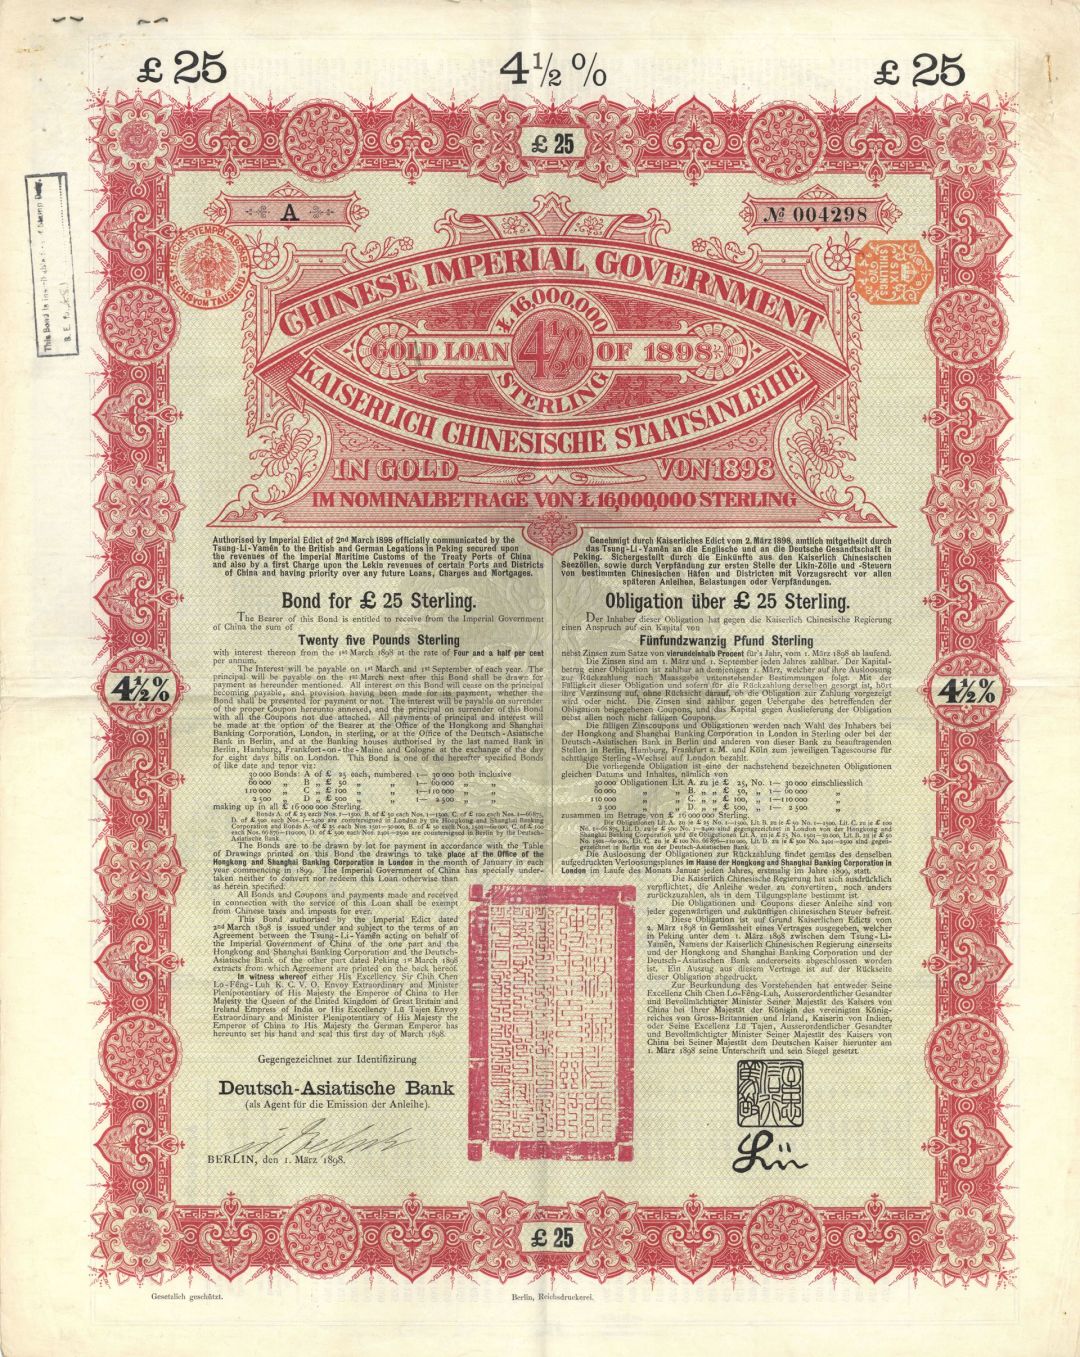 25 British Pound Bond of 1898 Anglo-German Chinese Imperial Government Gold Loan - China - Uncanceled Gold Bond